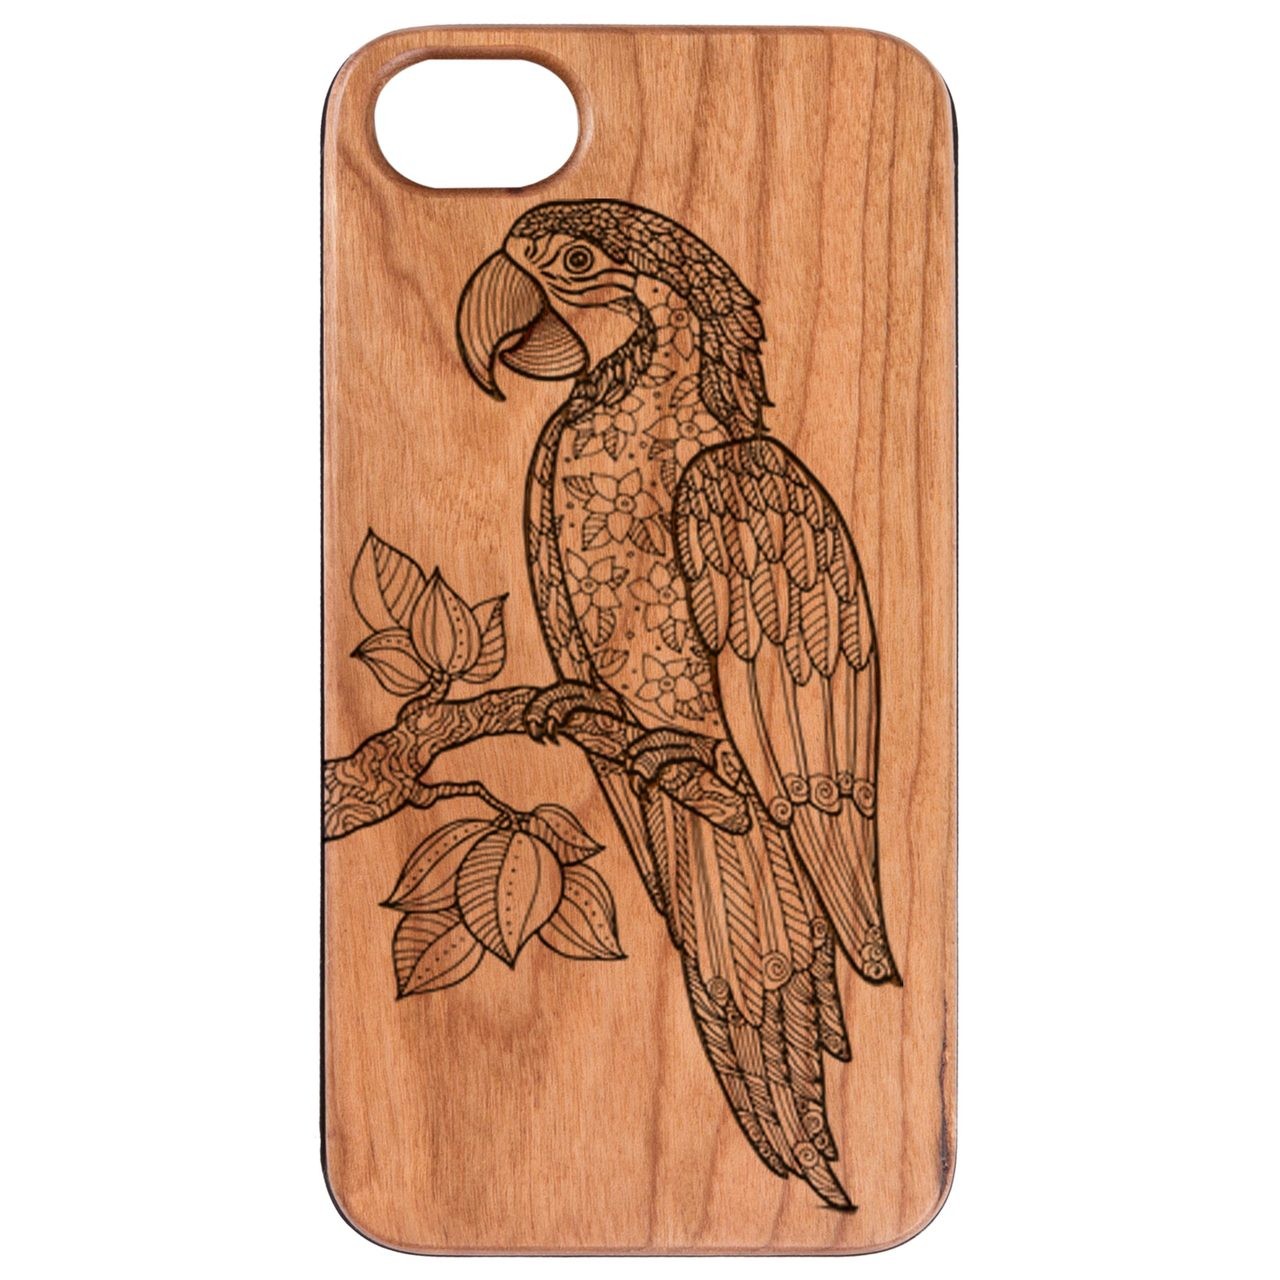  Parrot - Engraved - Wooden Phone Case - IPhone 13 Models